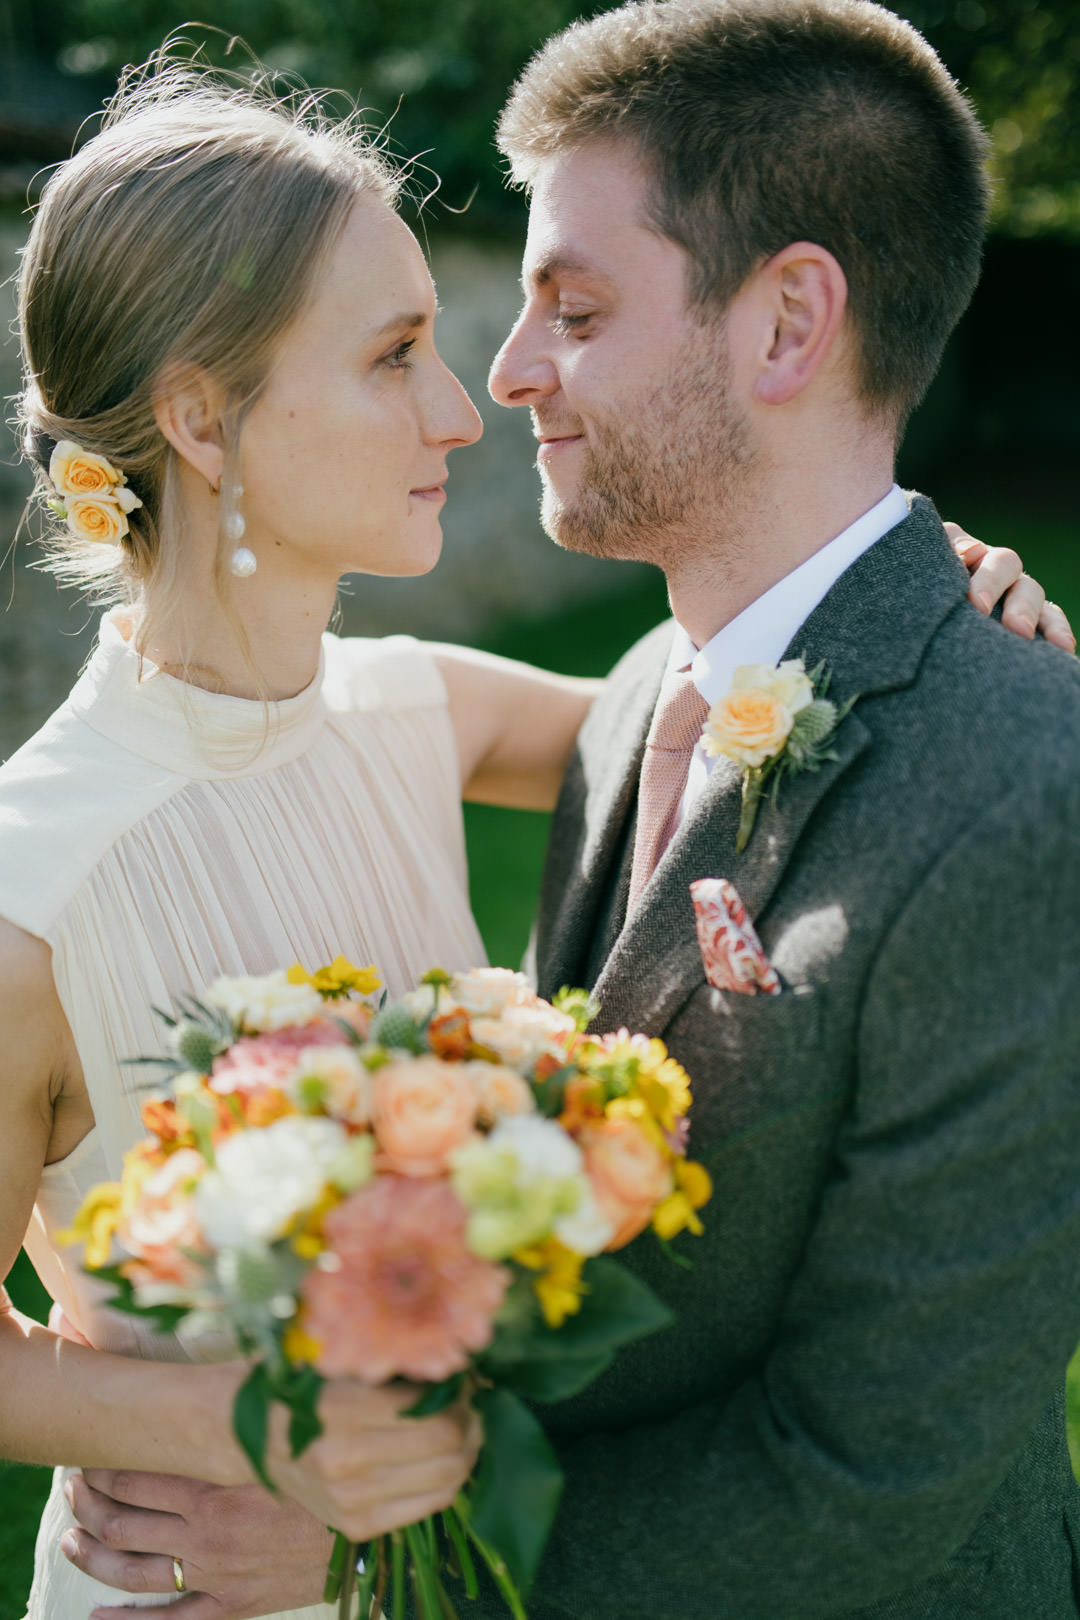 bride and groom embracing in golden sunlight holding flowers